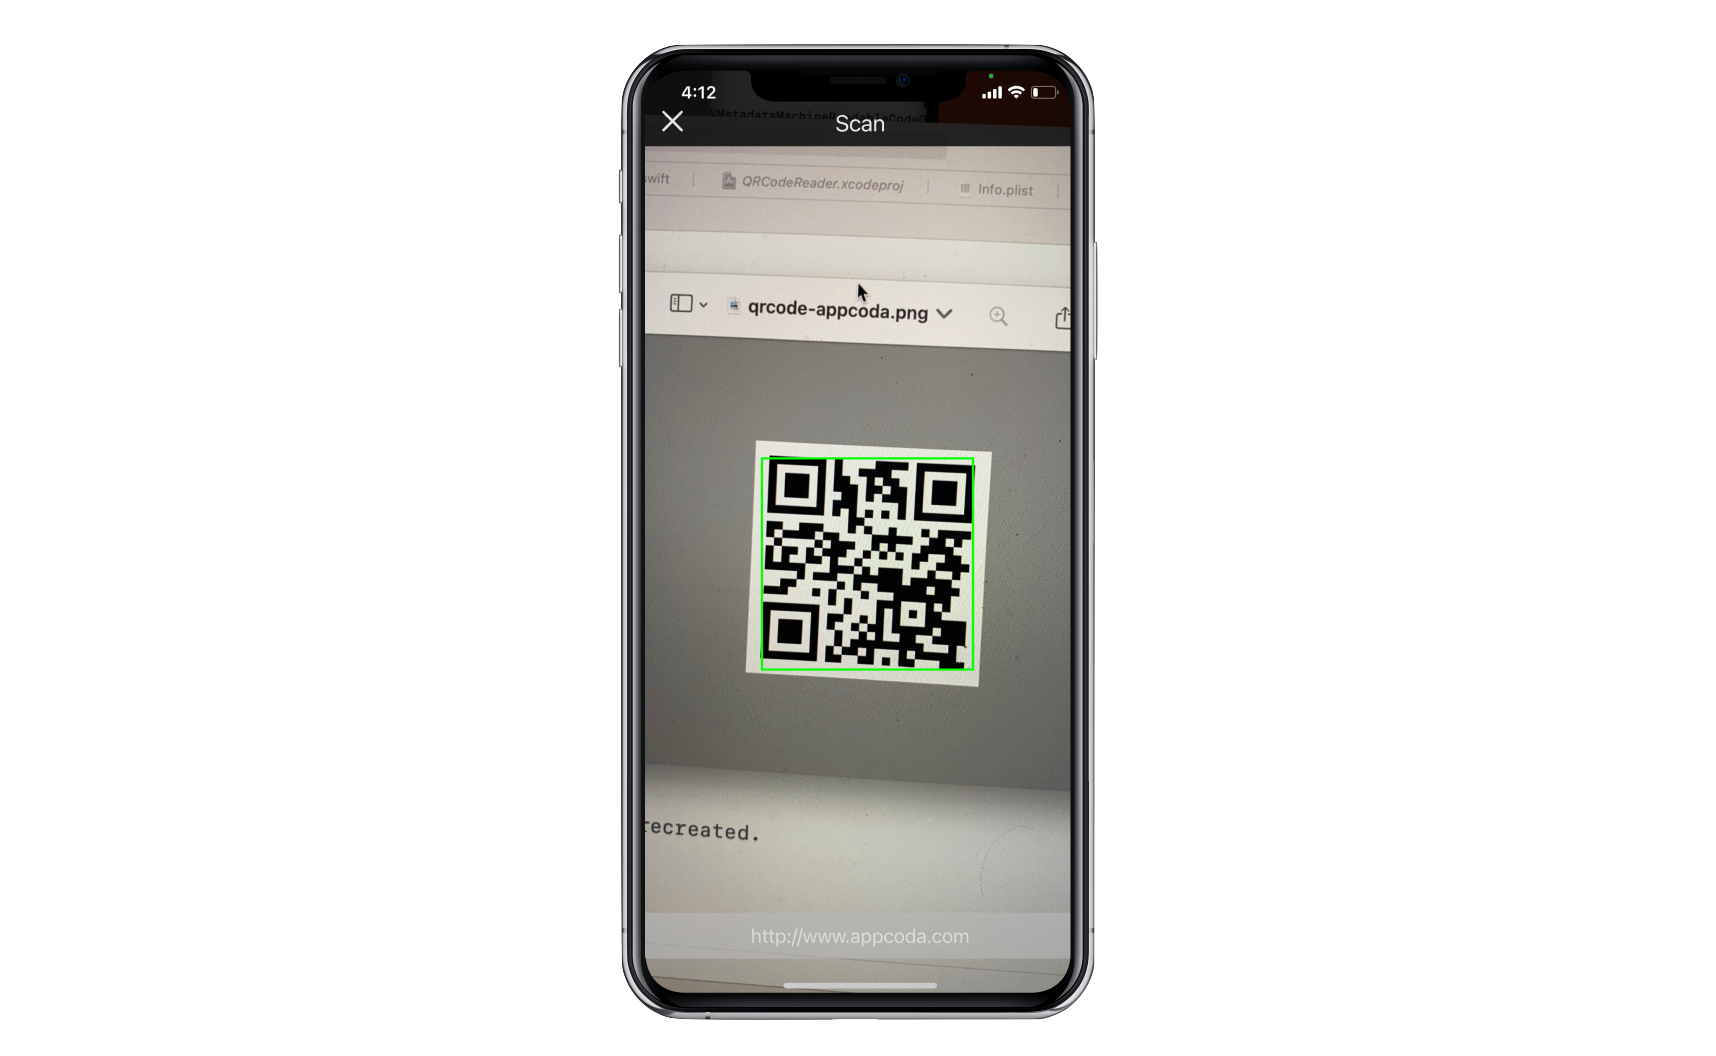 Figure 11.5. Scanning and decoding QR codes